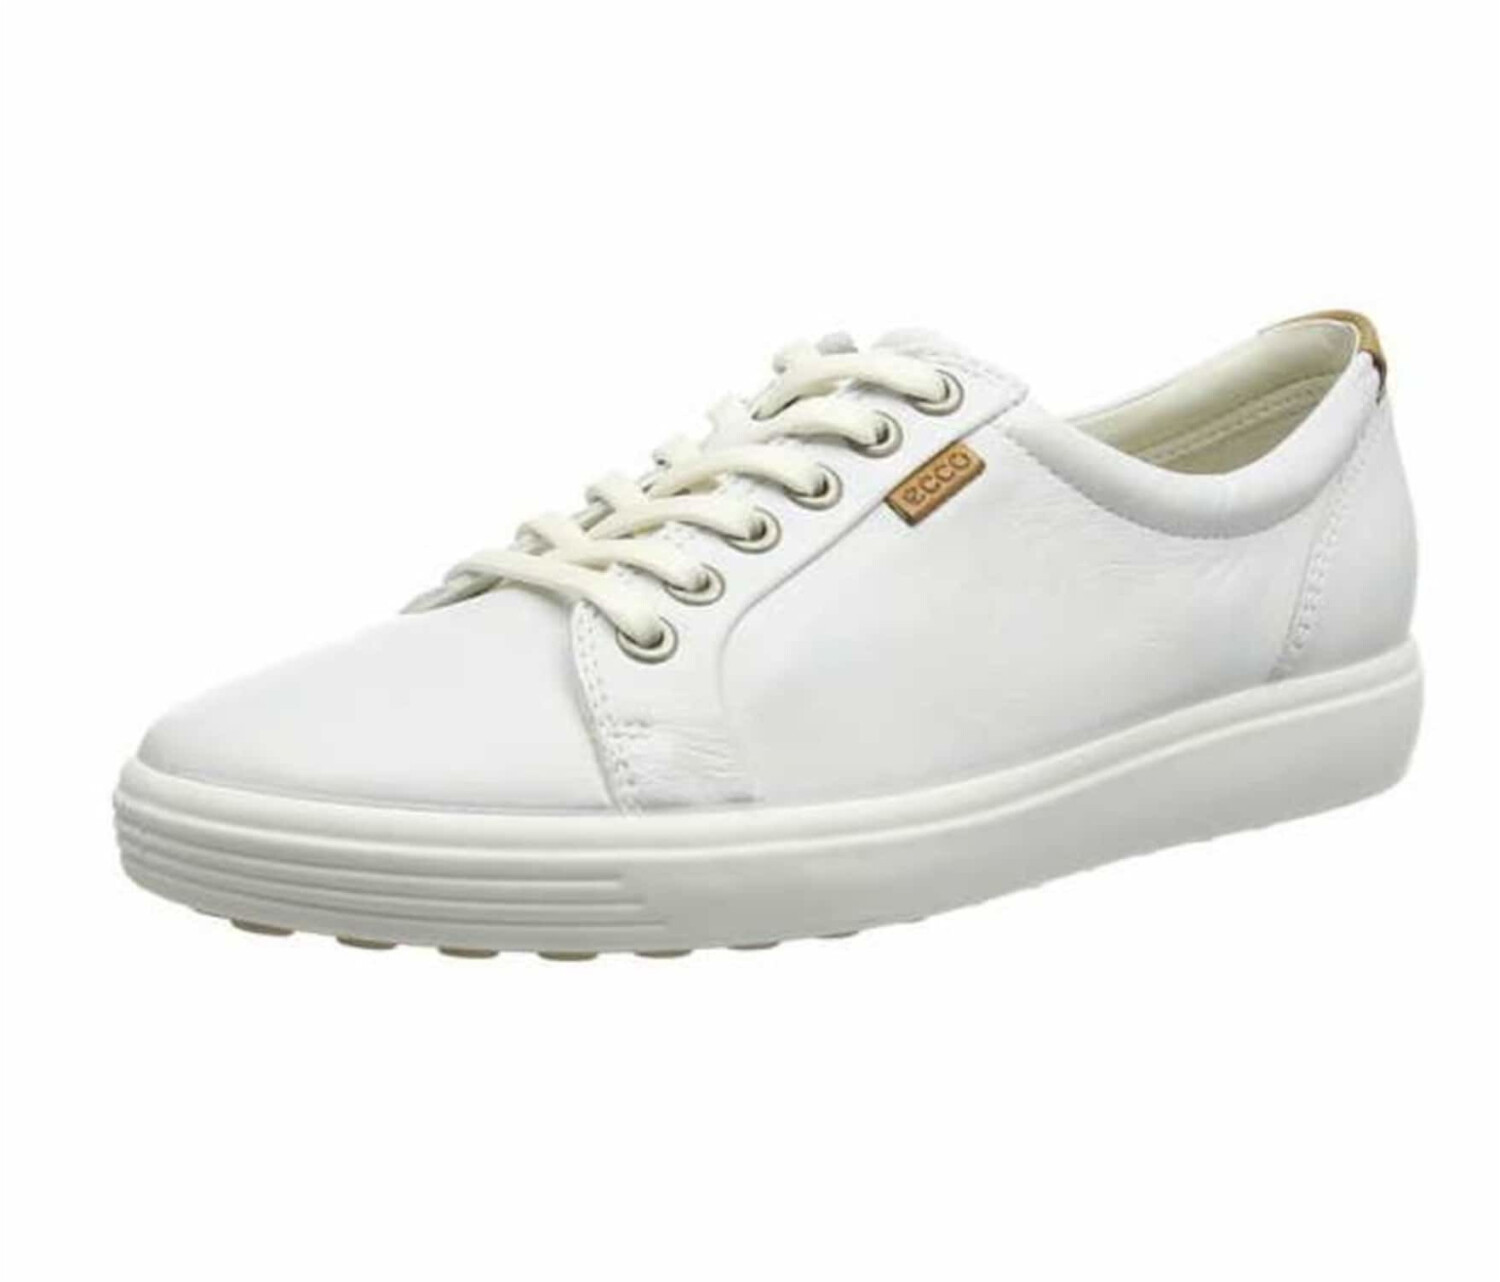 Buy Ecco Soft 7 Women white from £96.66 (Today) – Best Deals on idealo ...